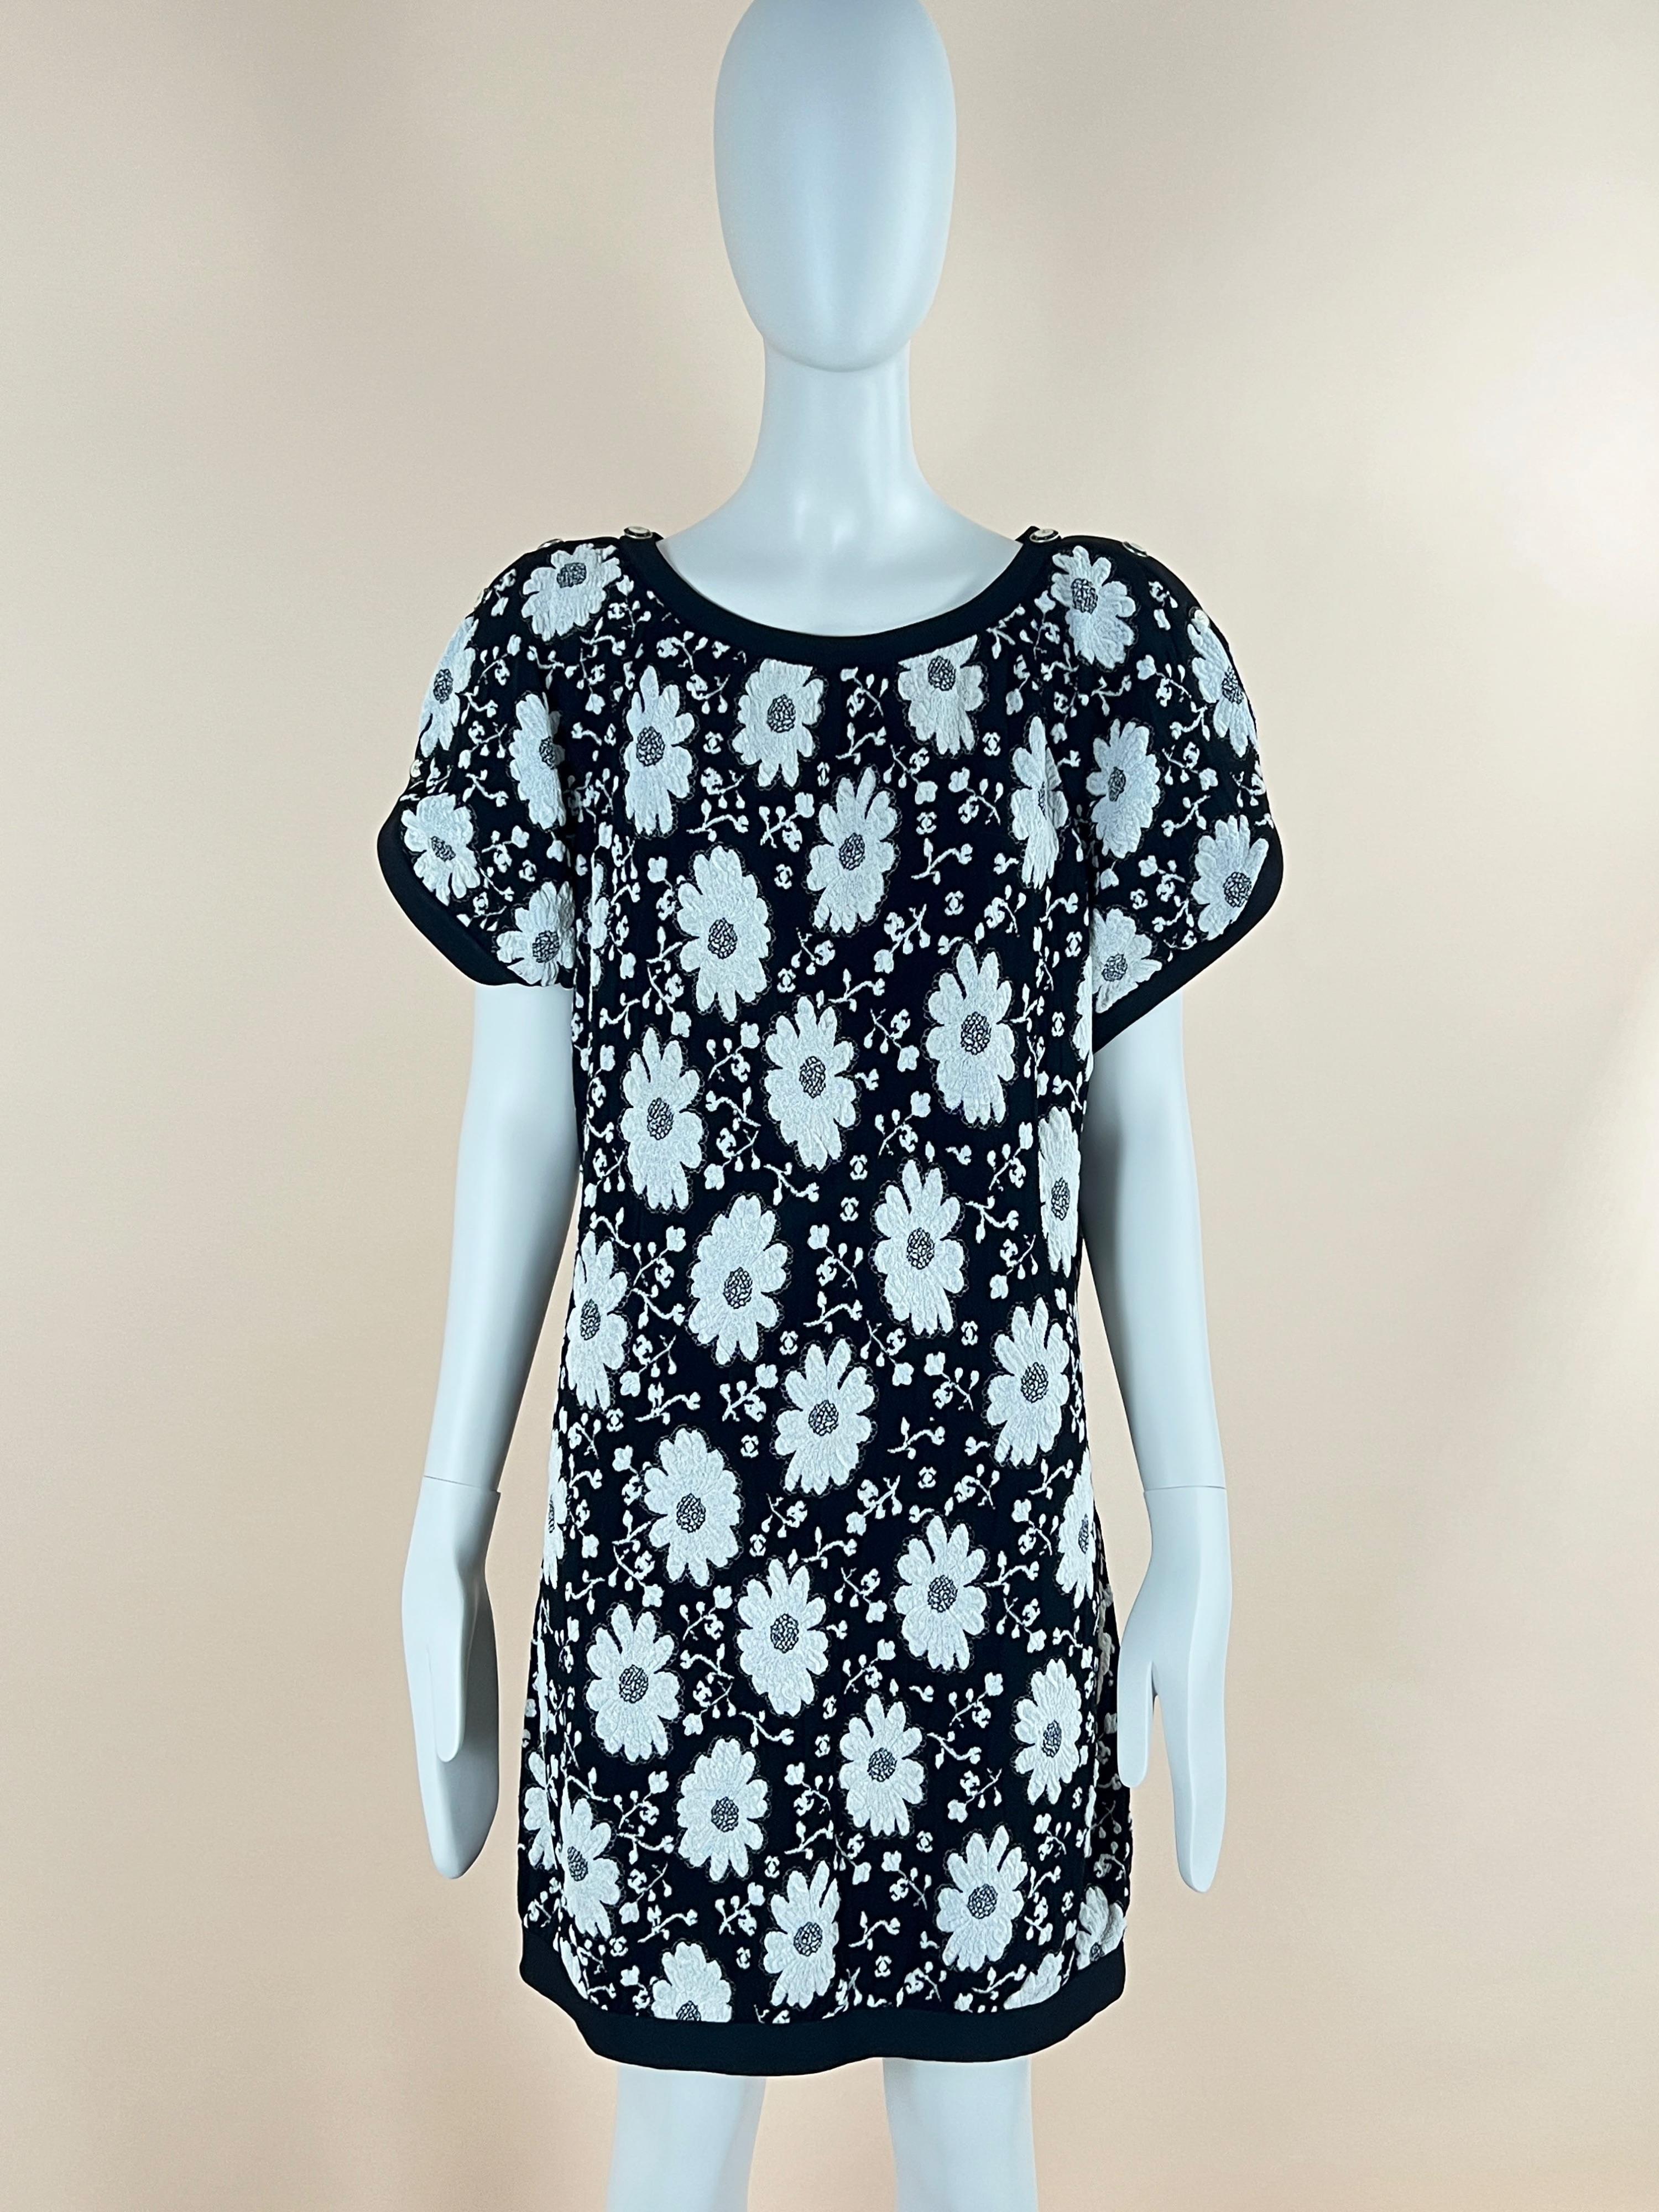 Chanel Singapore `Collection Camellia Runway Dress 2